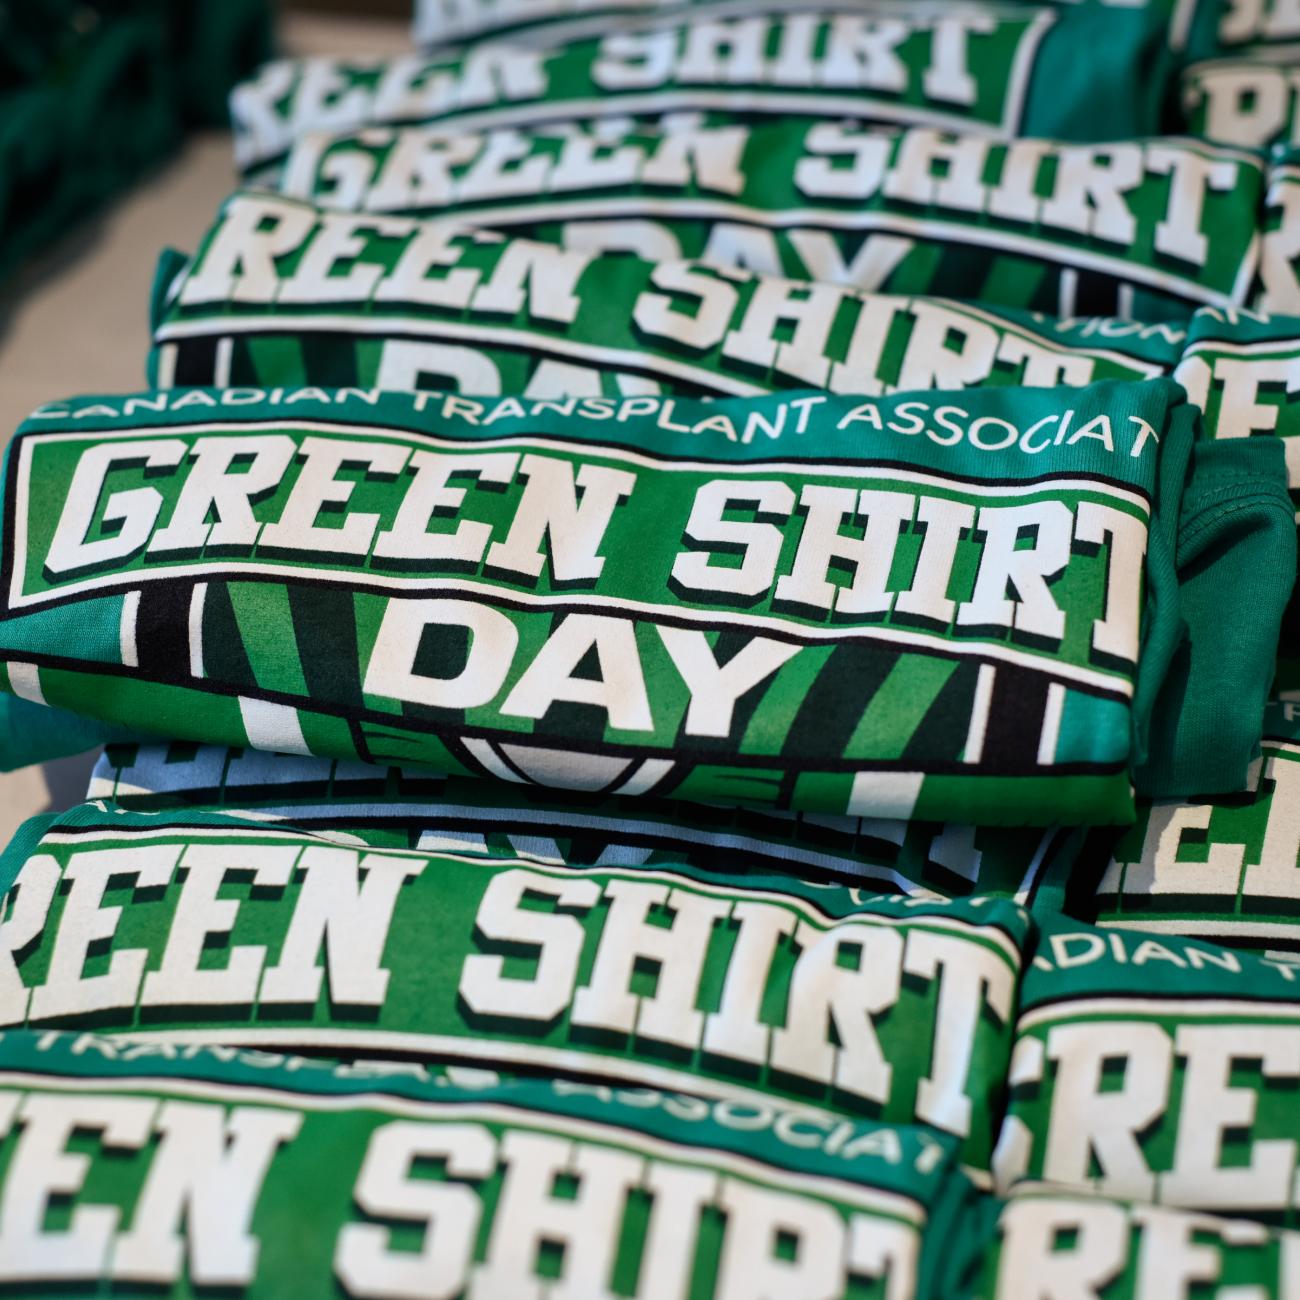 a photograph of a pile of green Green Shirt Day t-shirts on a table.